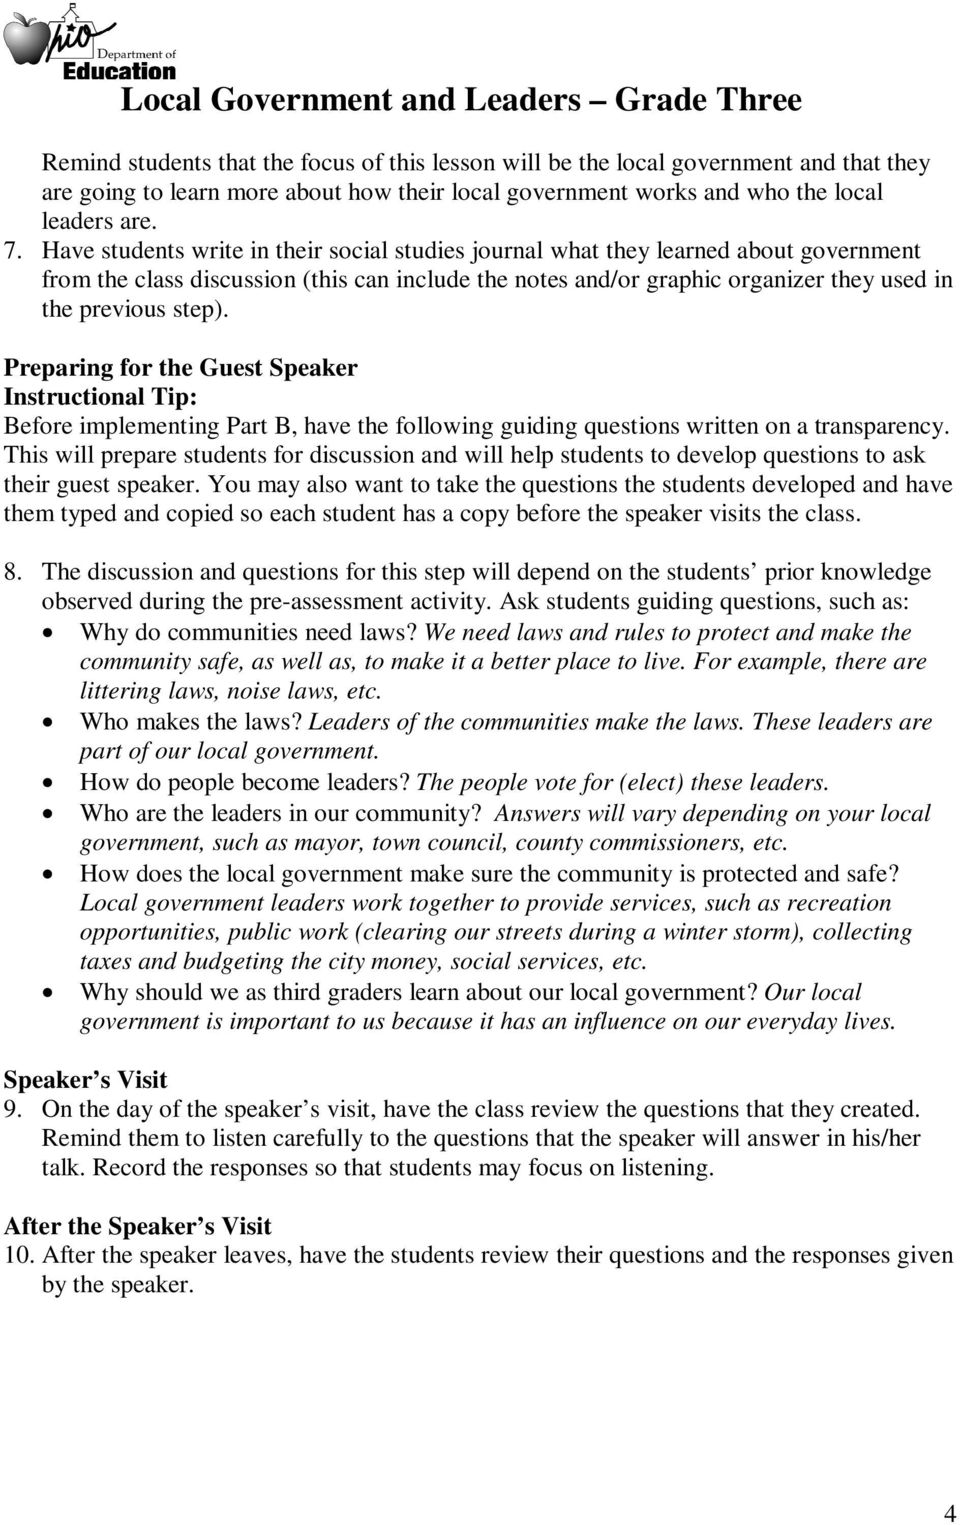 Preparing for the Guest Speaker Instructional Tip: Before implementing Part B, have the following guiding questions written on a transparency.